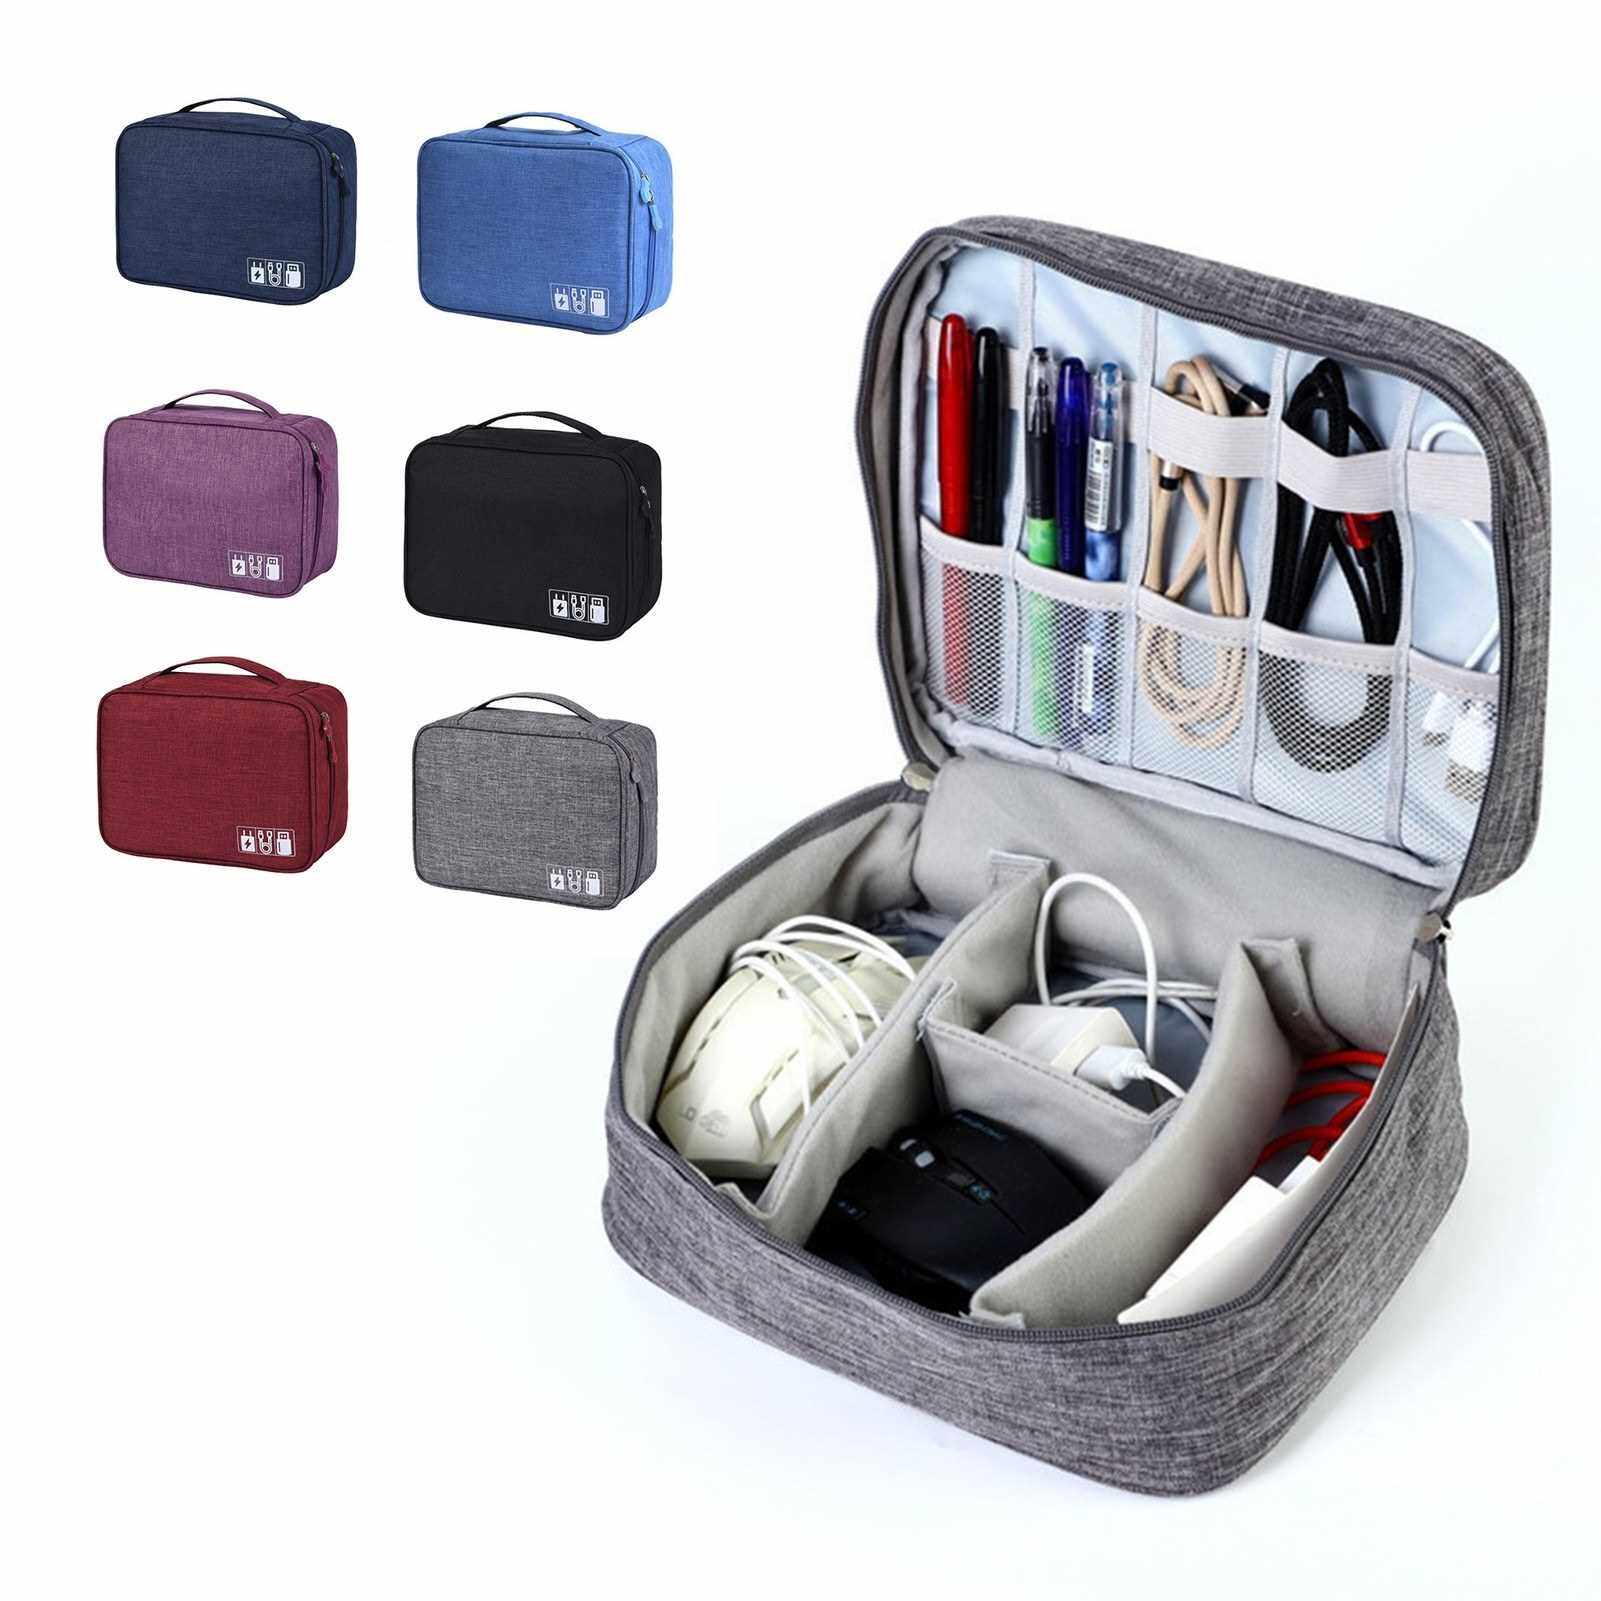 BEST SELLER Electronics Organizer Travel Bag for Cable Accessories Storage Bag Pouch Free Separated Space Waterproof for Cable Cord Charger Hard Drive Earphone Power Bank (Black)